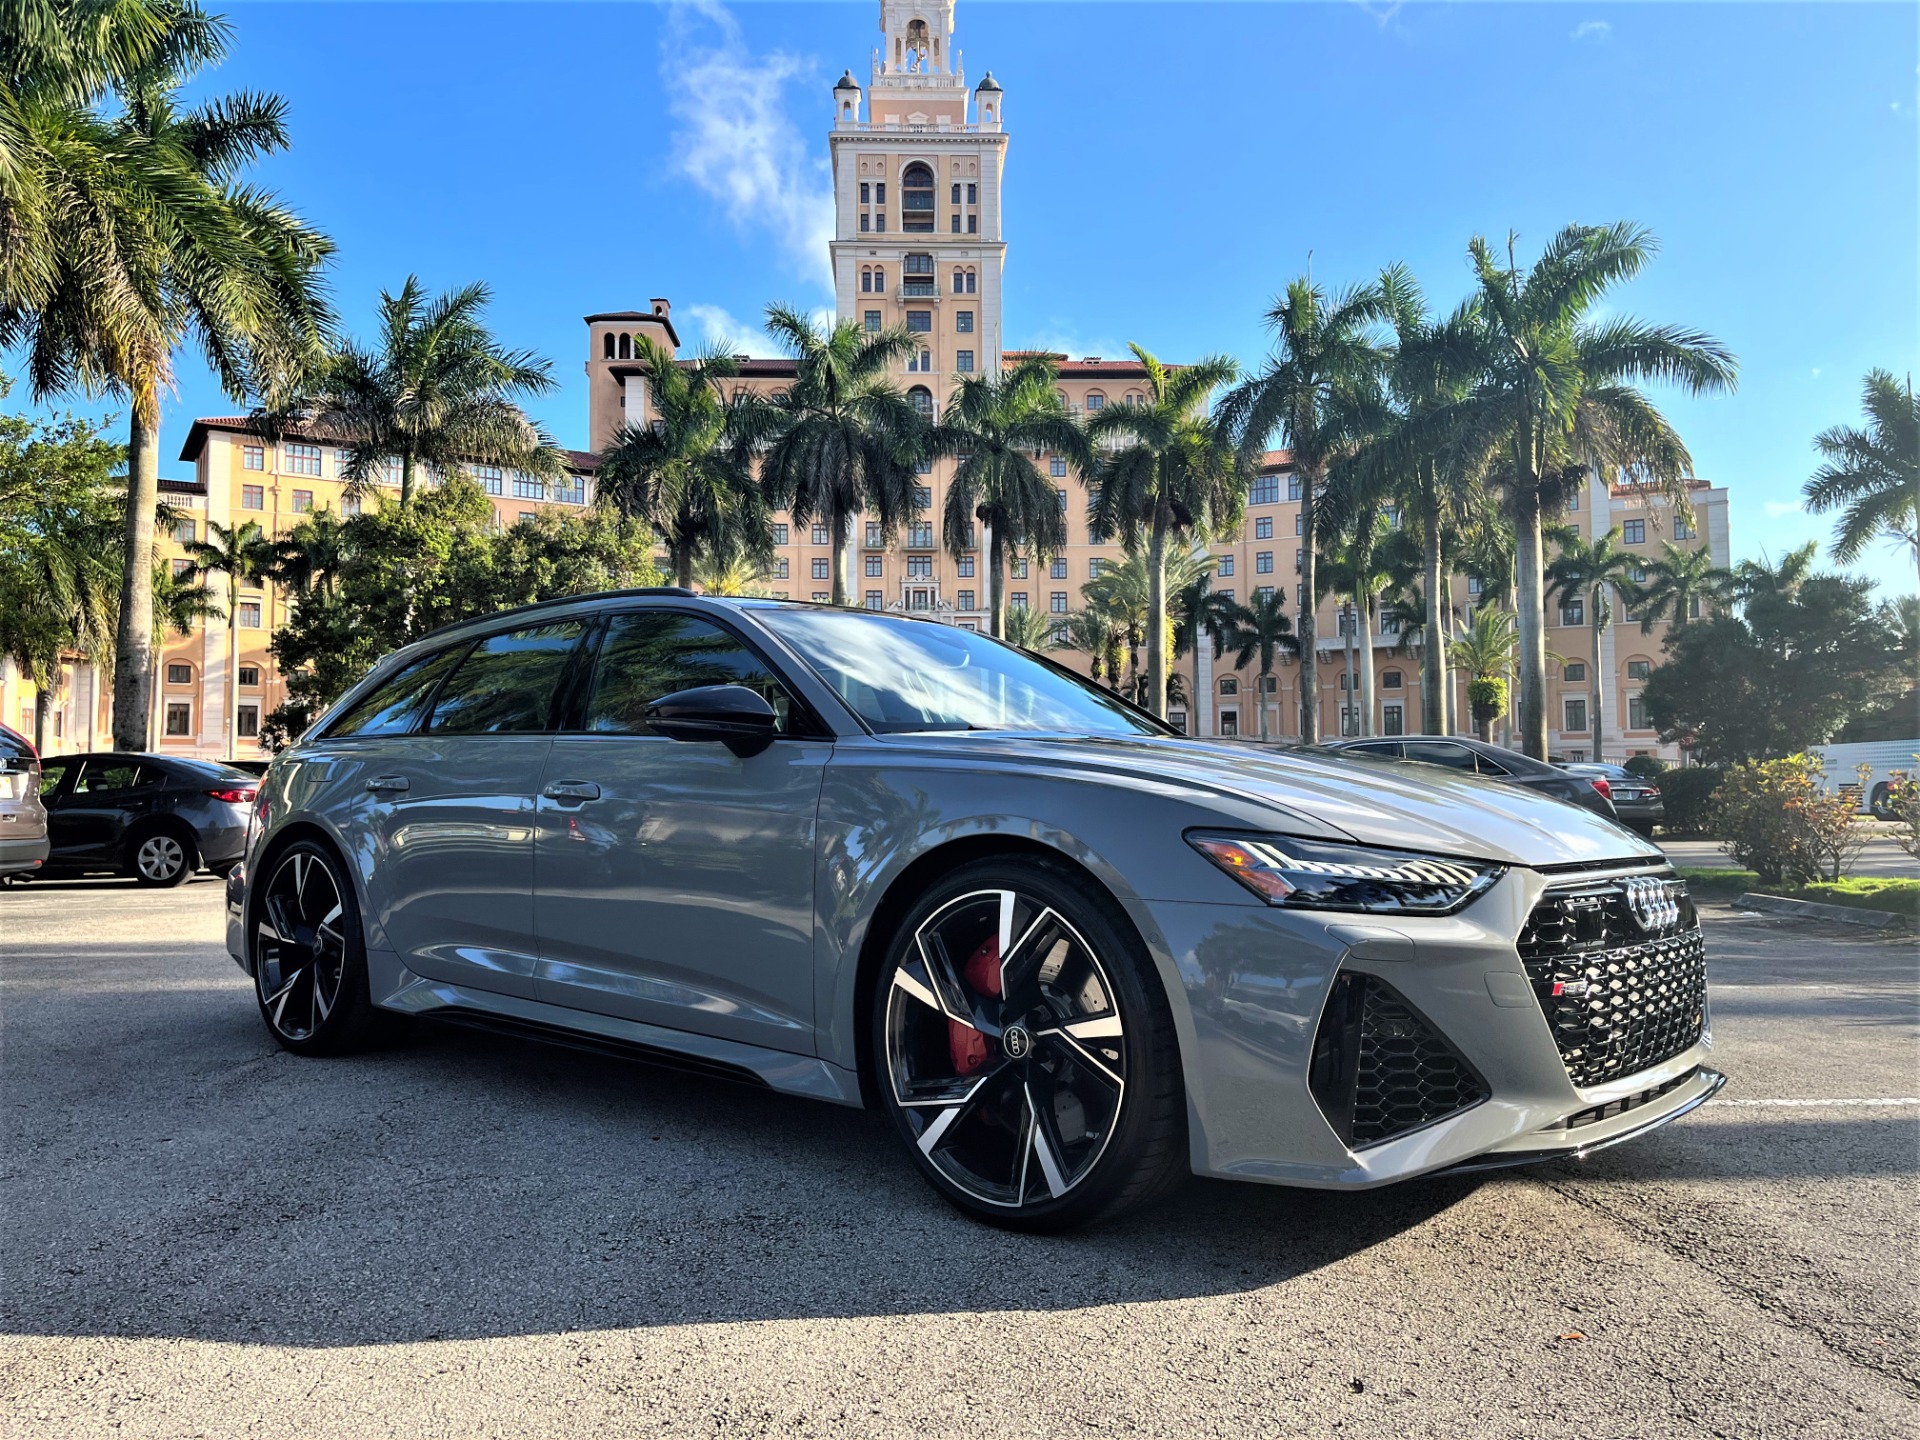 Used 2022 Audi RS 6 Avant 4.0T quattro Avant for sale Sold at The Gables Sports Cars in Miami FL 33146 1